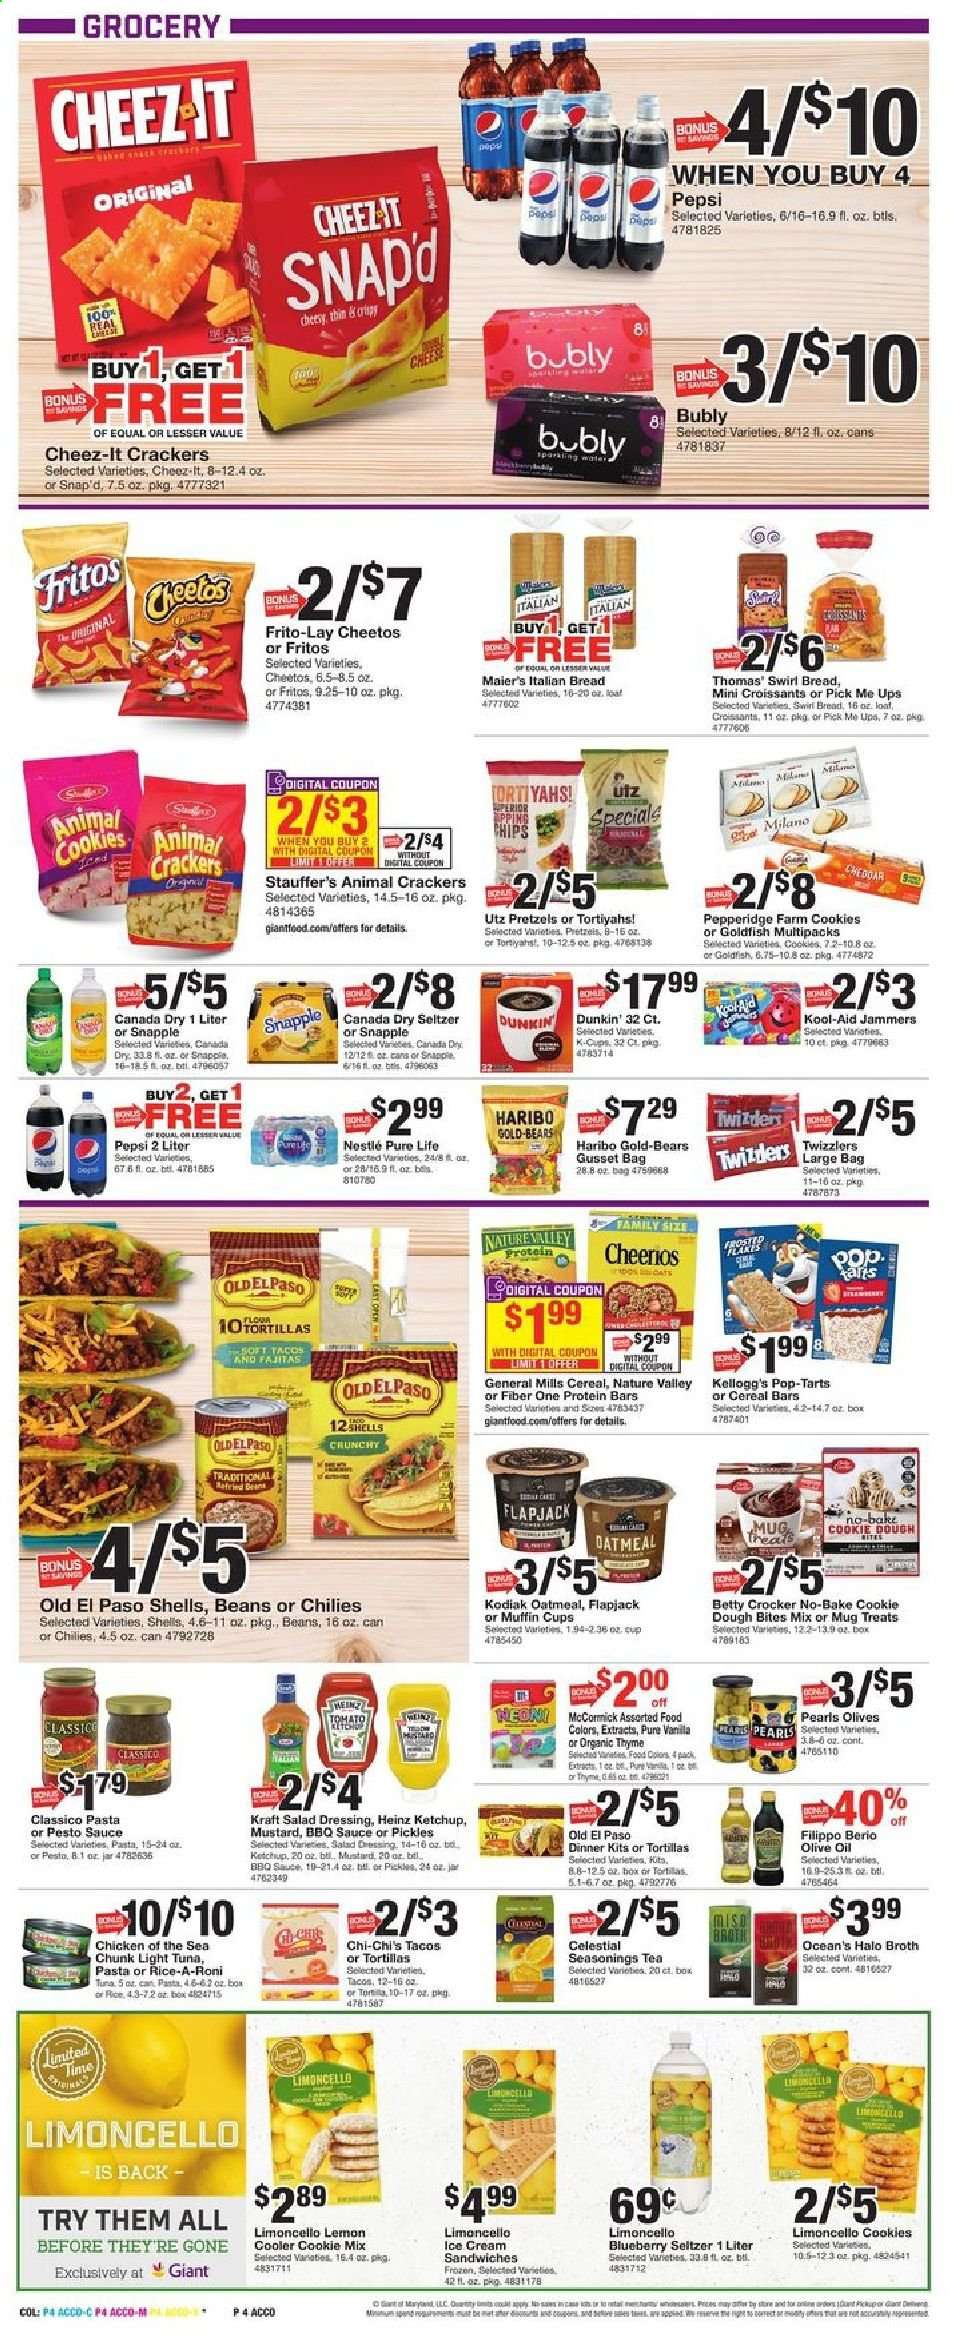 thumbnail - Giant Food Flyer - 04/16/2021 - 04/22/2021 - Sales products - tortillas, pretzels, croissant, Old El Paso, tacos, muffin, Betty Crocker Mug Treats, pears, dinner kit, fajita, Kraft®, ice cream, ice cream sandwich, cookie dough, cookies, Haribo, cereal bar, crackers, Kellogg's, Pop-Tarts, Fritos, Cheetos, Goldfish, Frito-Lay, Cheez-It, oatmeal, broth, Heinz, pickles, olives, light tuna, Chicken of the Sea, Cheerios, protein bar, Nature Valley, Fiber One, miso, mustard, salad dressing, ketchup, pesto, dressing, Classico, olive oil, Canada Dry, Pepsi, Snapple, seltzer water, tea, Limoncello, cup. Page 4.